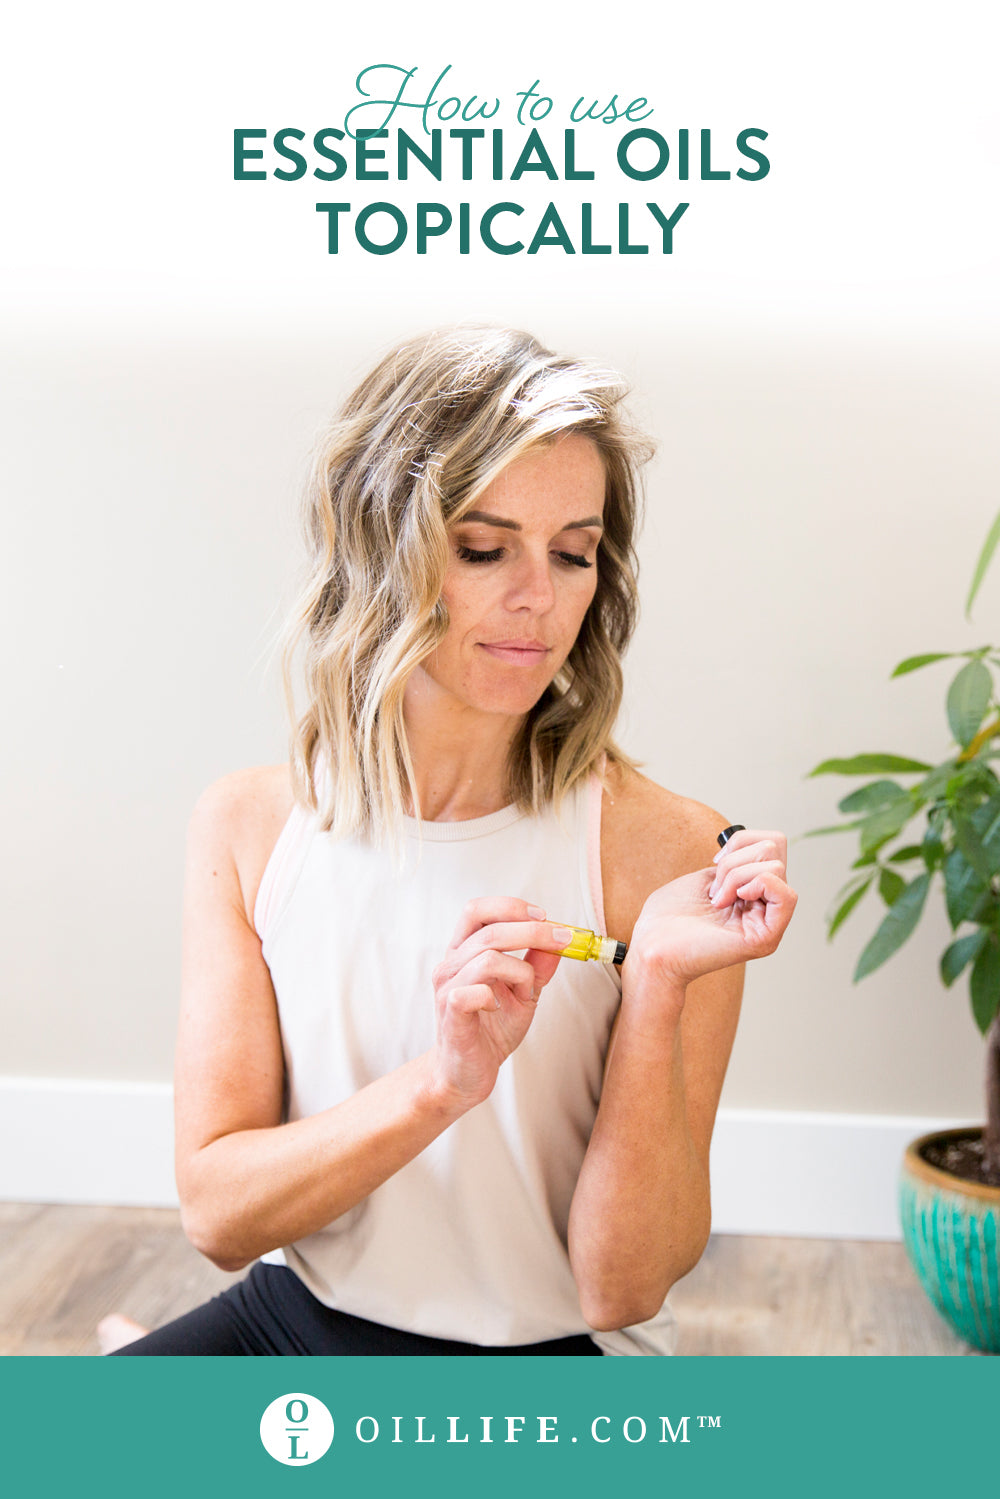 How To Use & Apply Essential Oils Topically